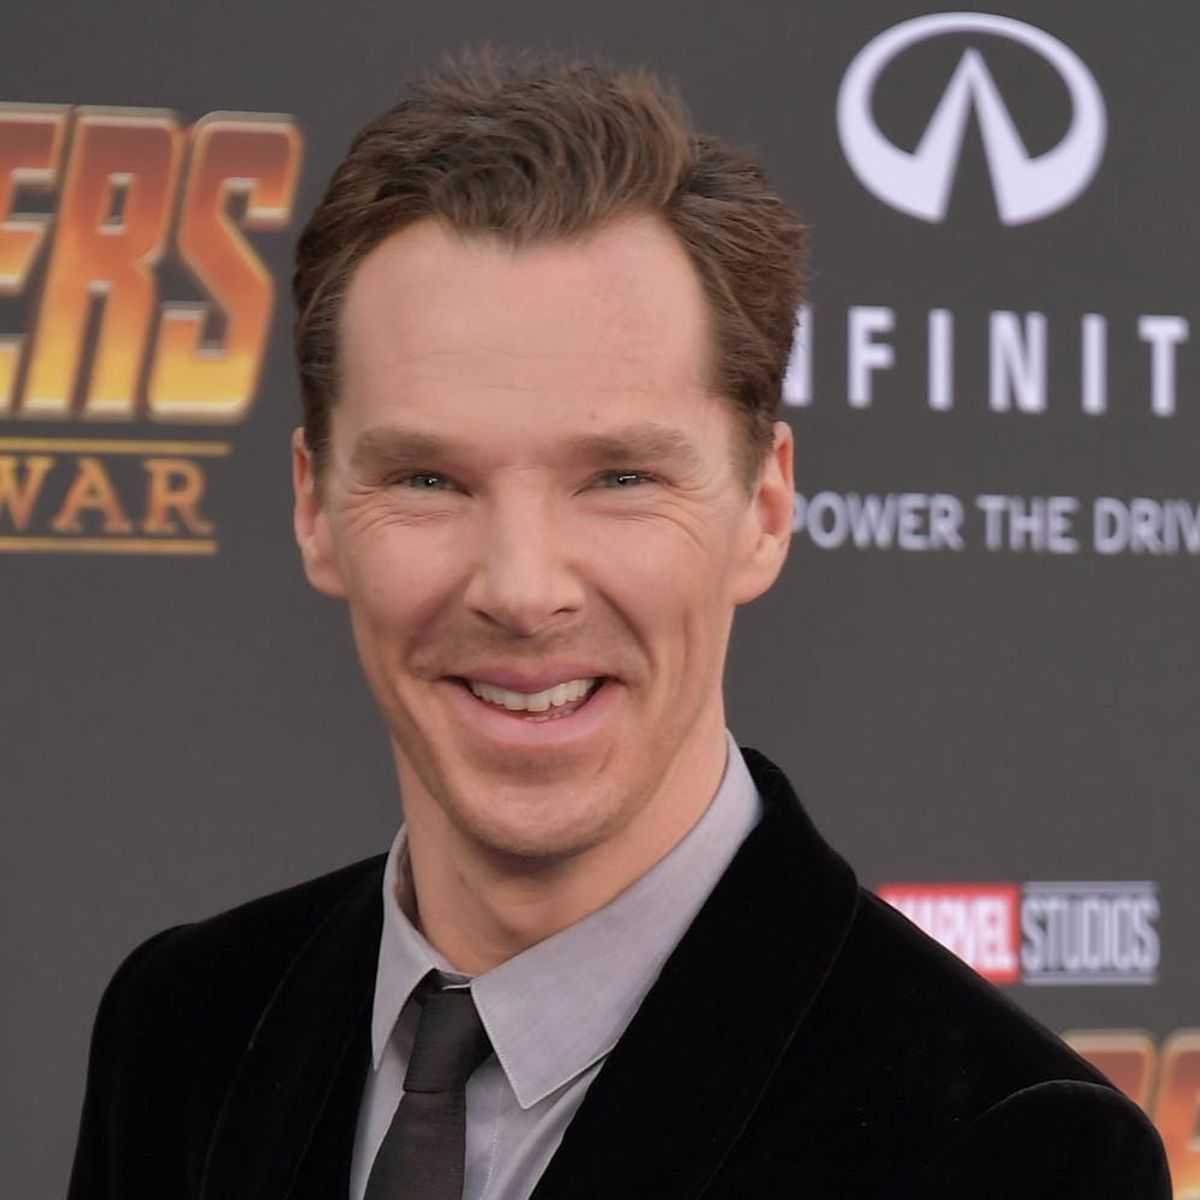 Benedict Cumberbatch Reportedly Saved a Man from Being Mugged